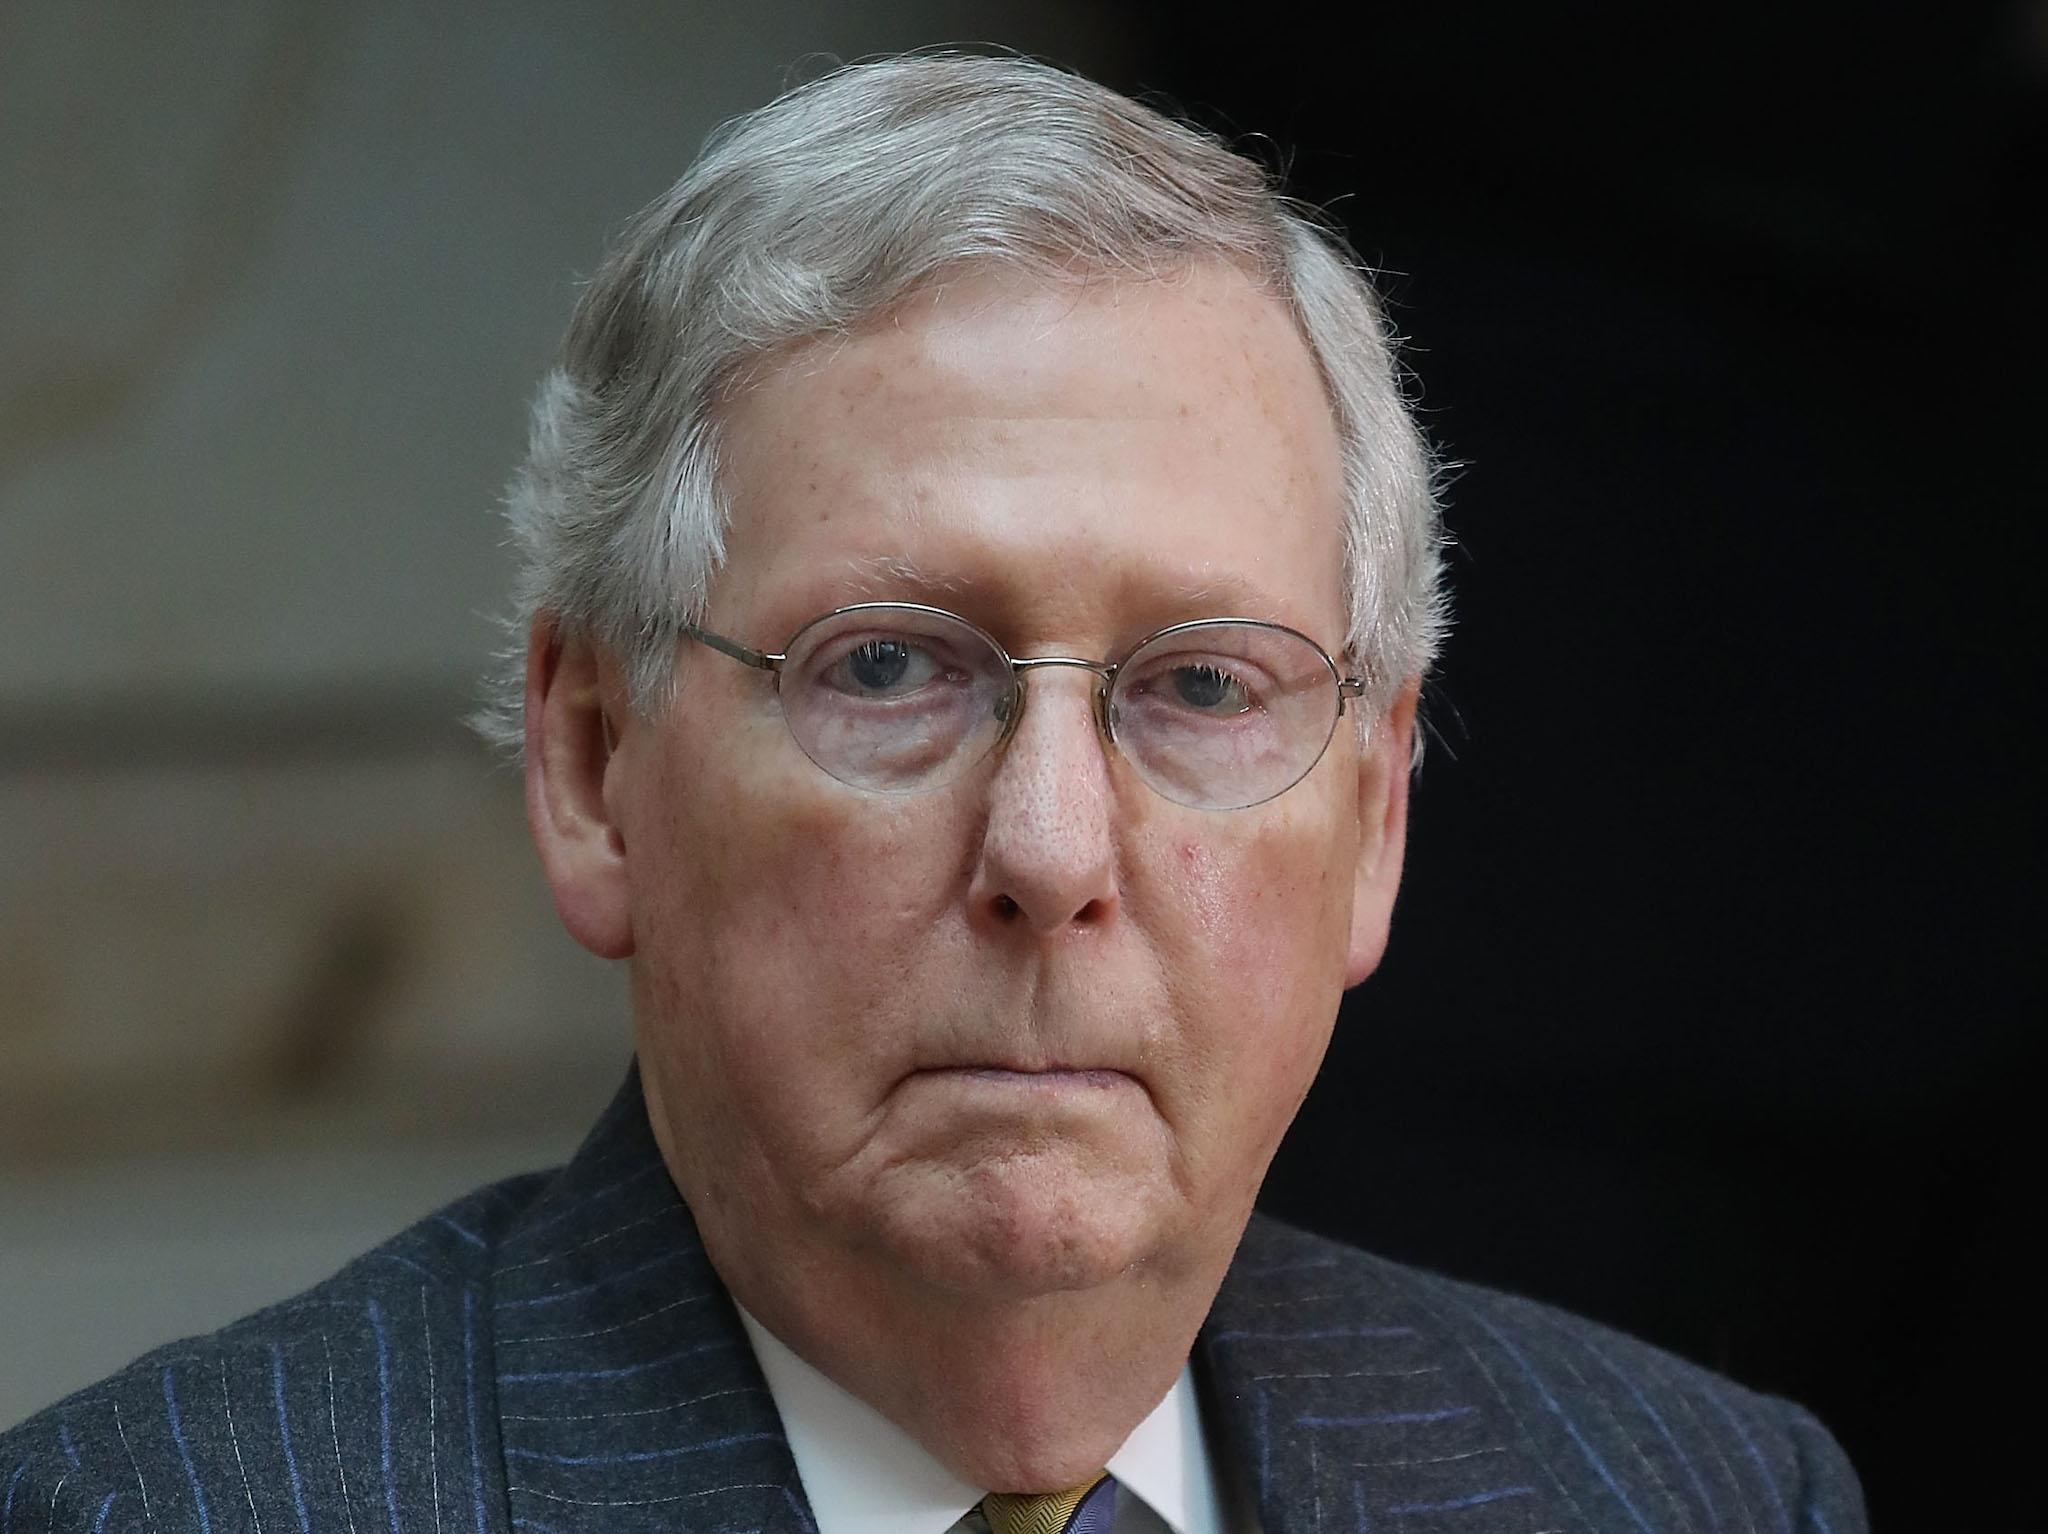 Senate Majority Leader Mitch McConnell (Photo by Mark Wilson/Getty Images)